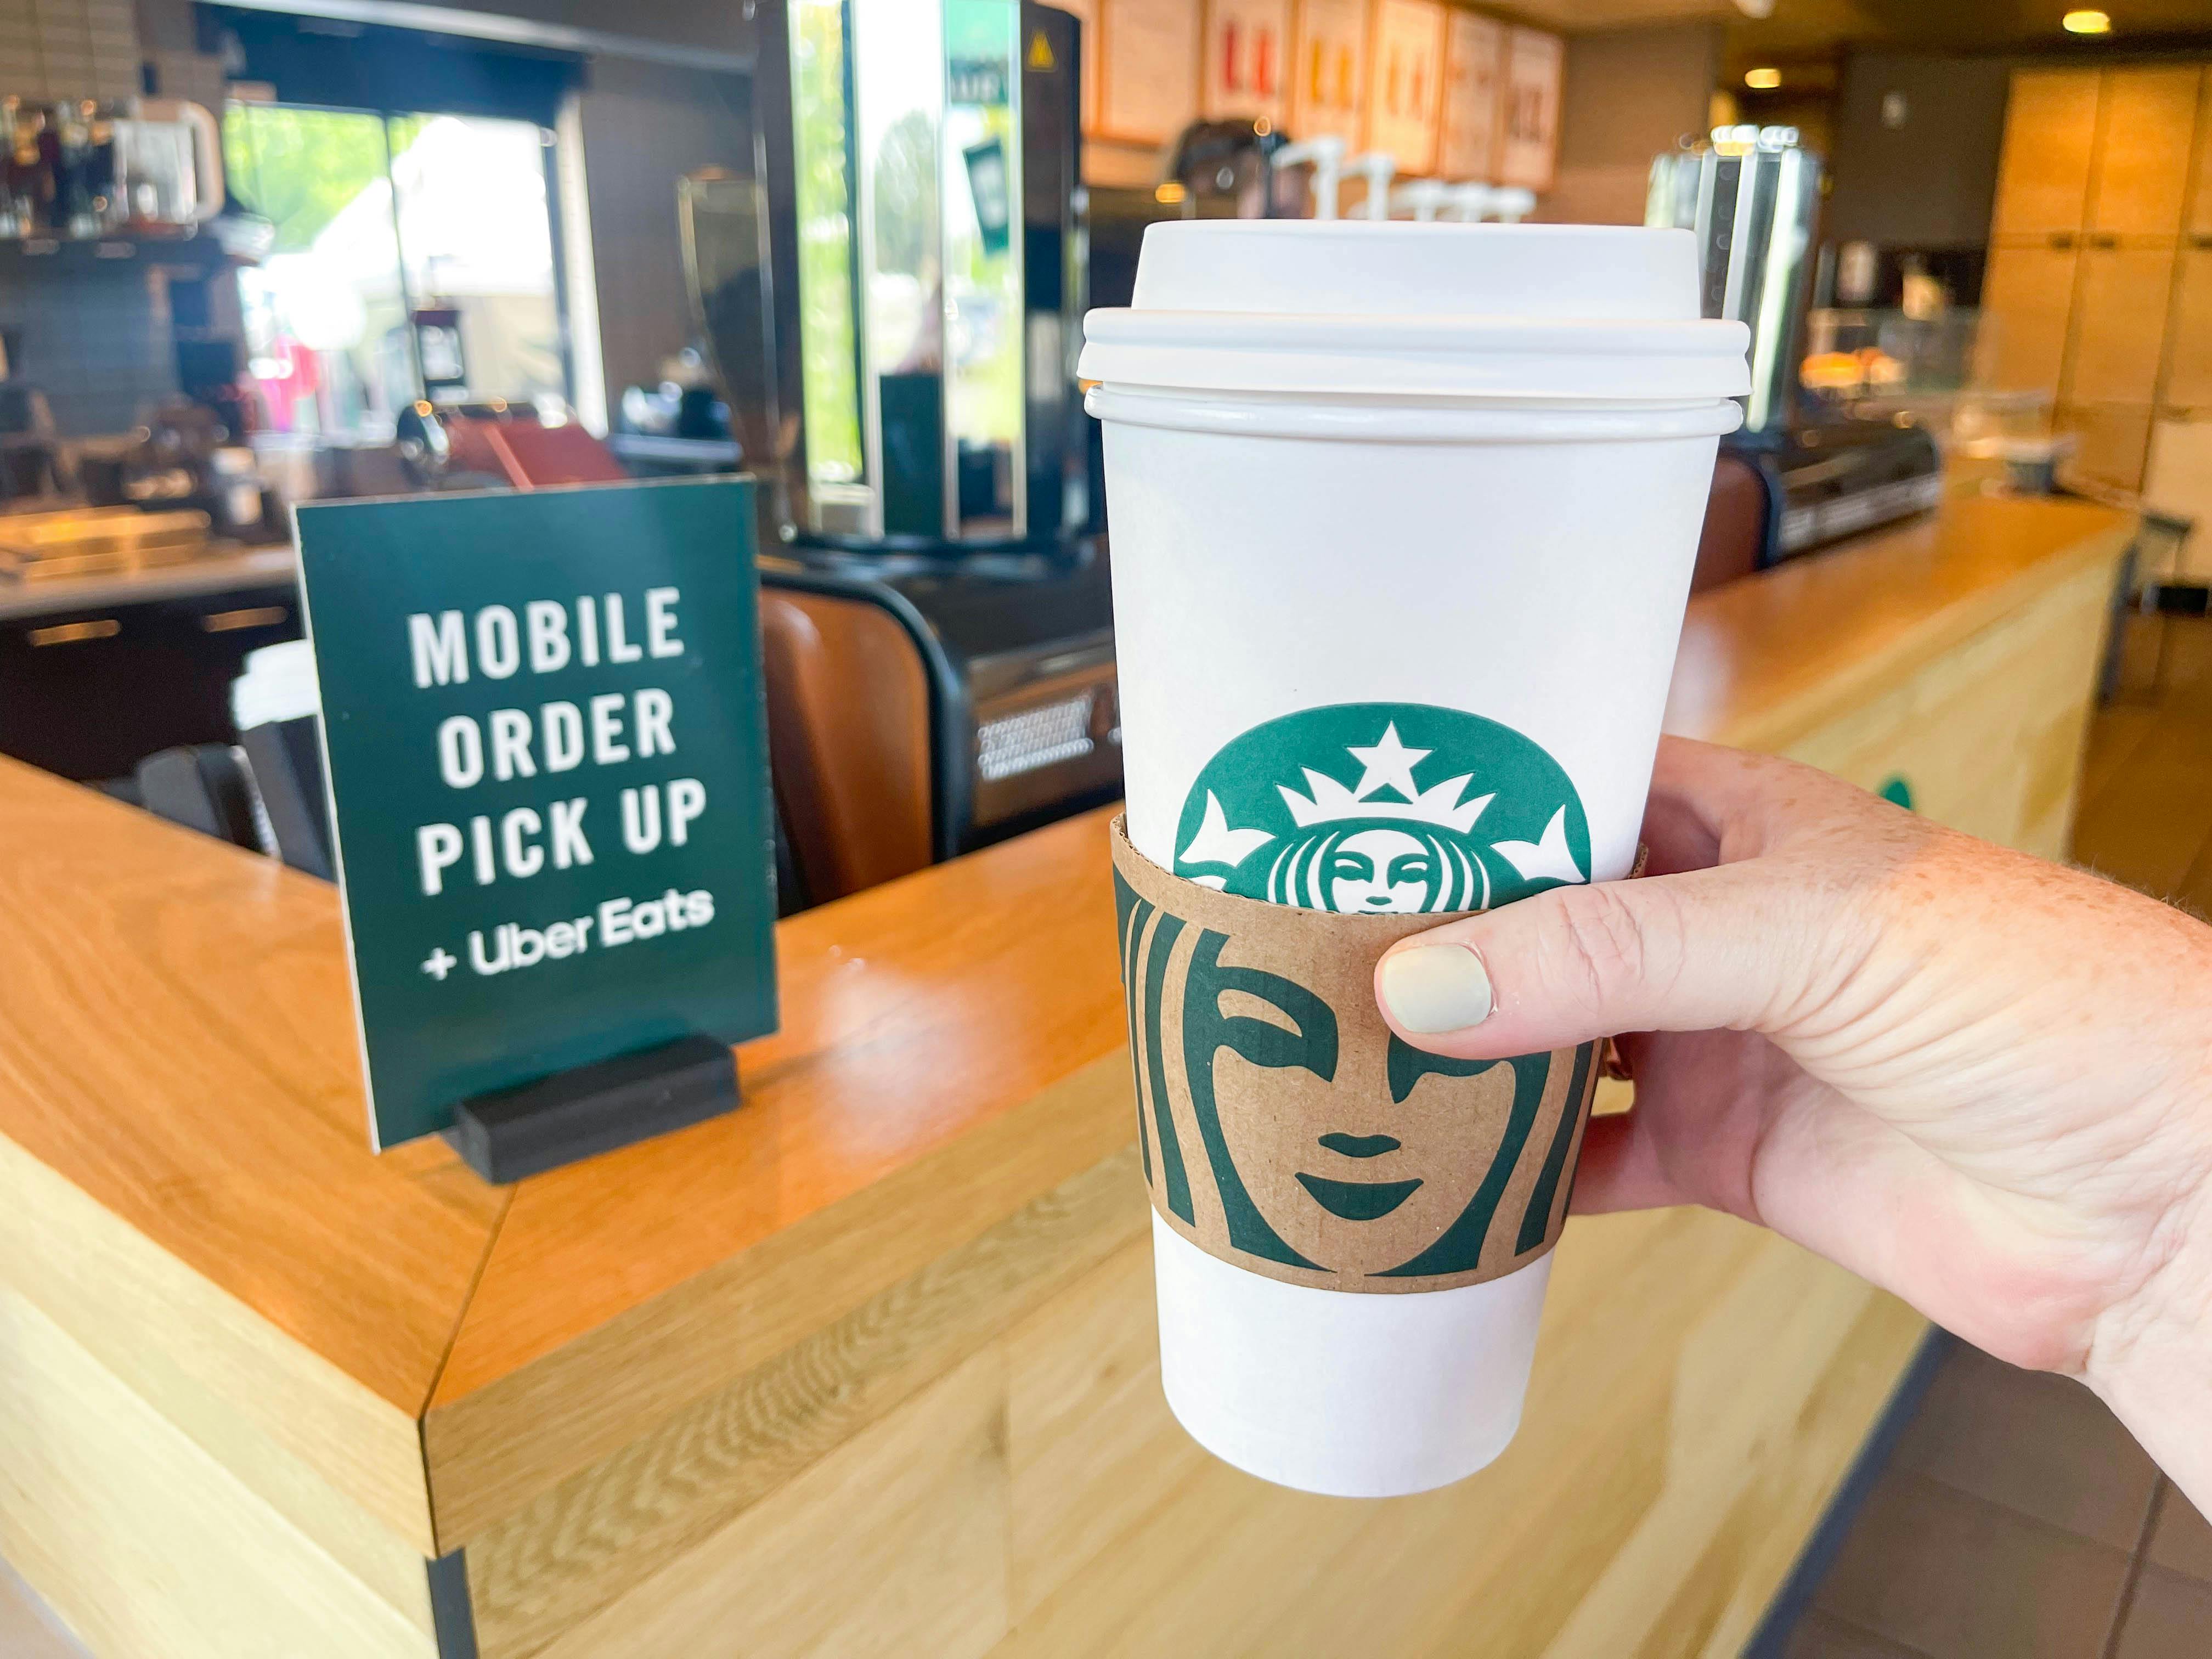 A person holding a large Starbucks hot beverage near the Mobile Order Pick Up sign inside Starbucks